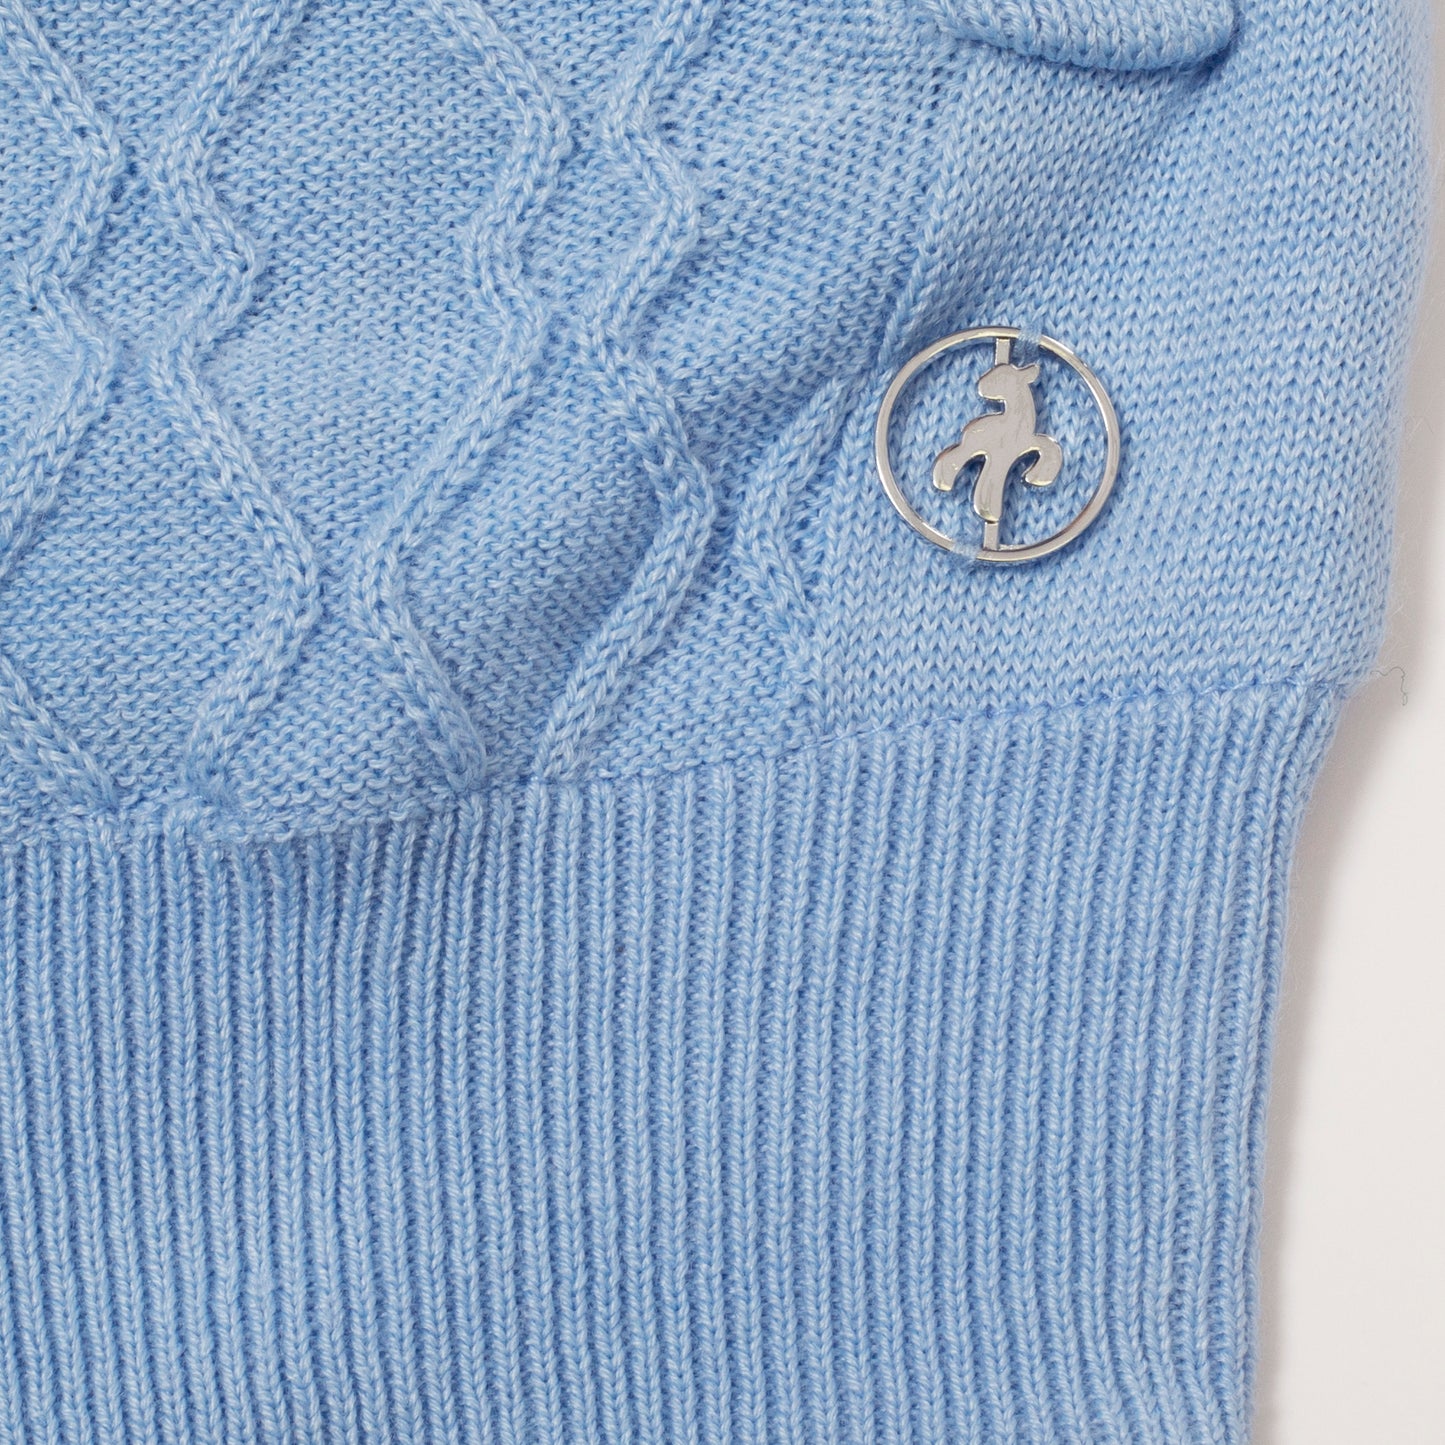 Green Lamb Ladies Lined Windstopper Cardigan with ZigZag Stitch Front Panel in Ice Blue - Last One Size 8 Only Left